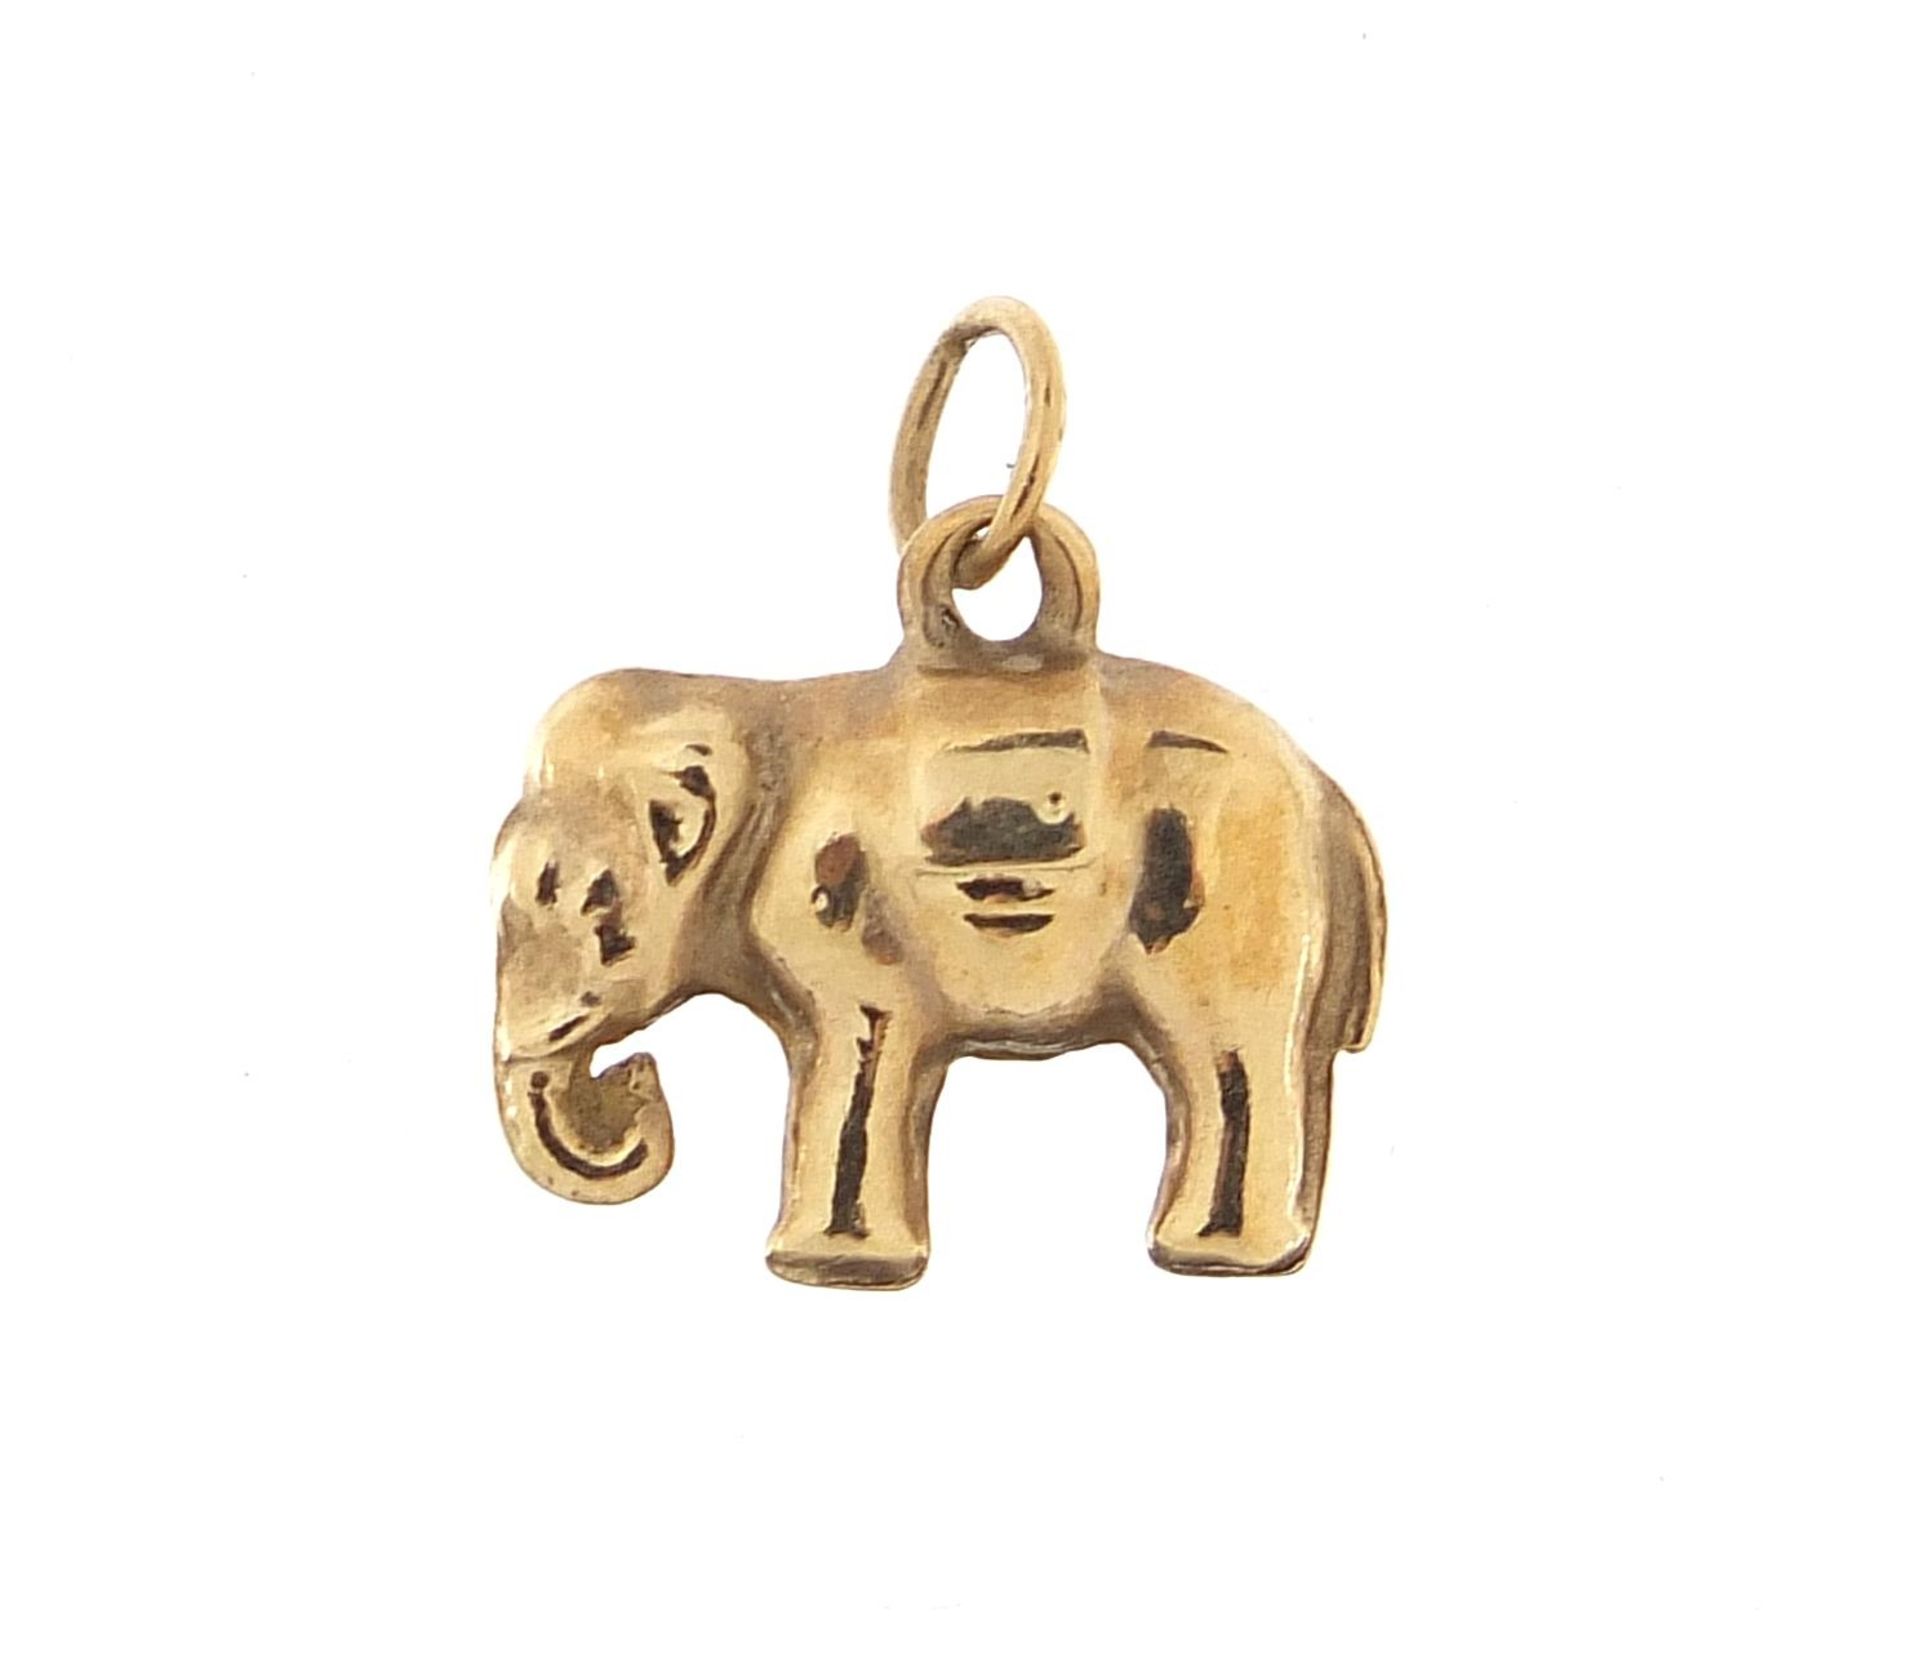 9ct gold elephant charm, 1.4cm in length, 0.7g